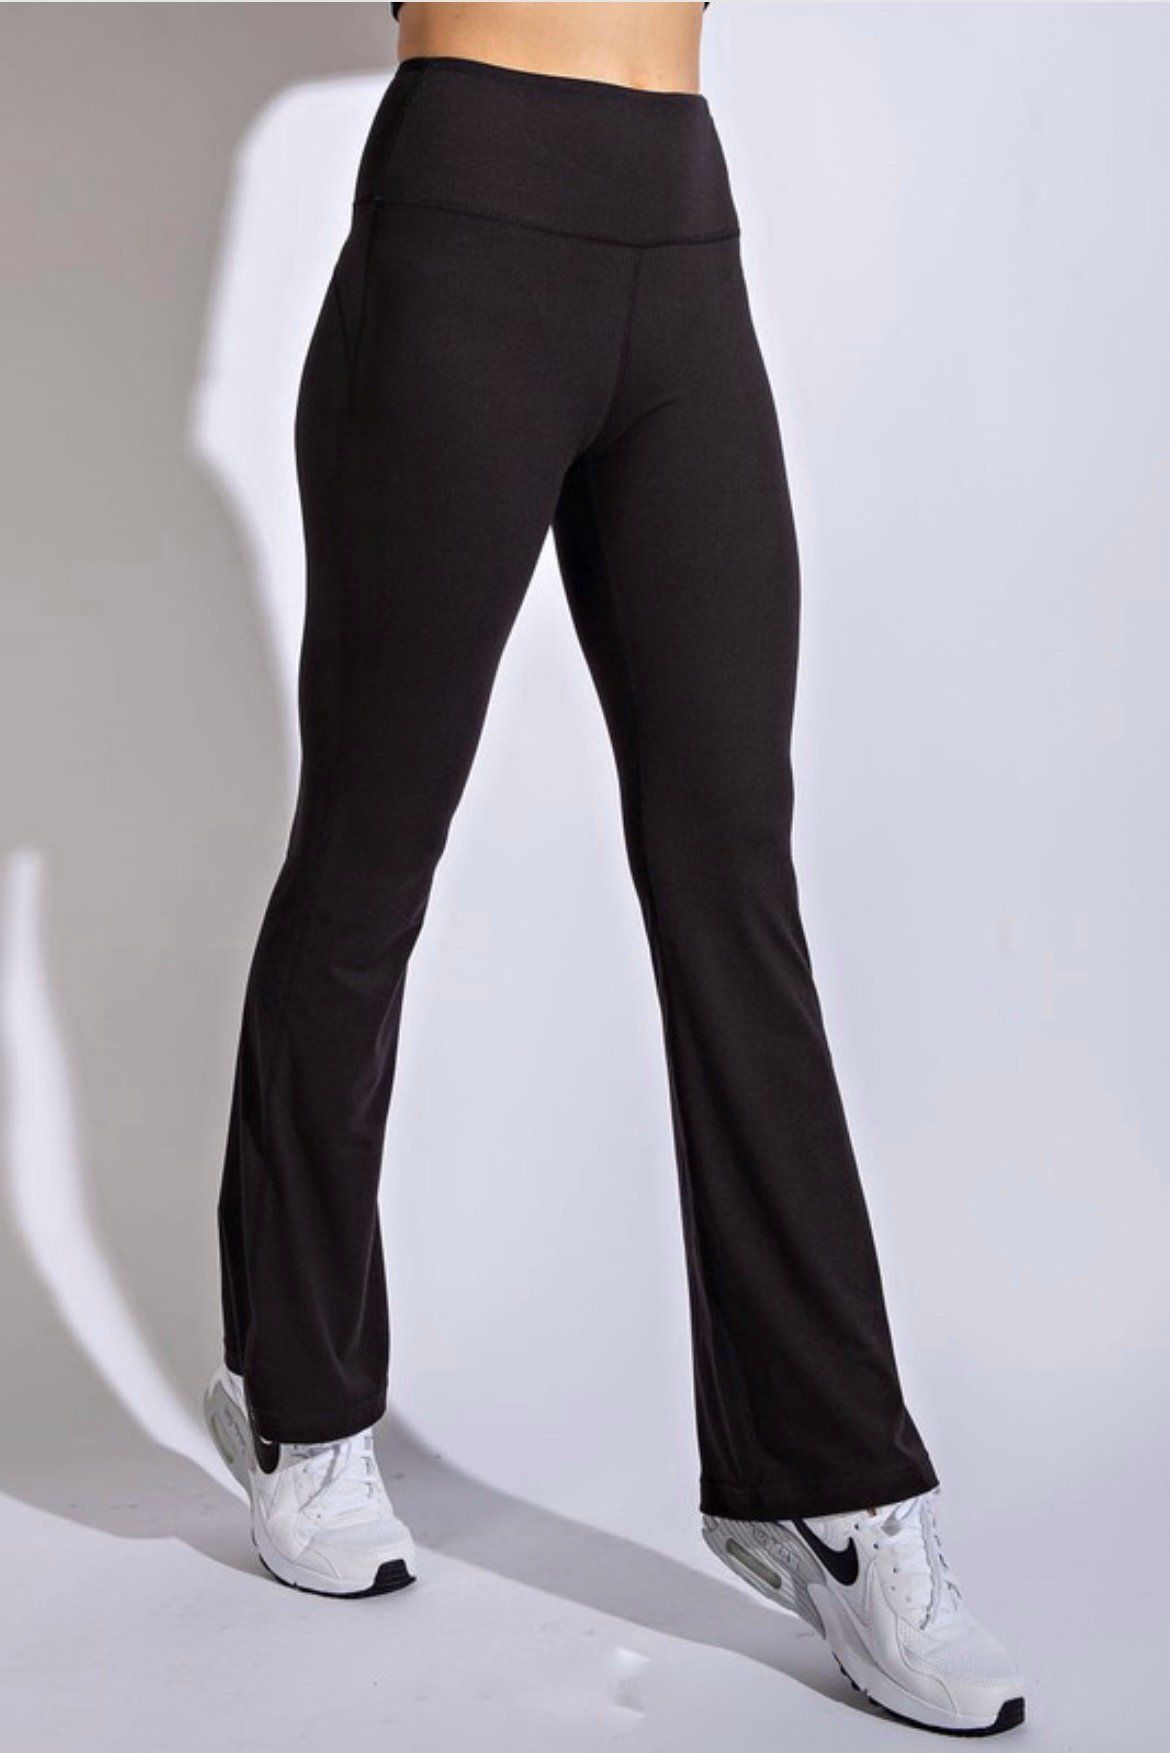 How to Style Bell Bottom Yoga Pants: Top 13 Ladylike Outfit Ideas